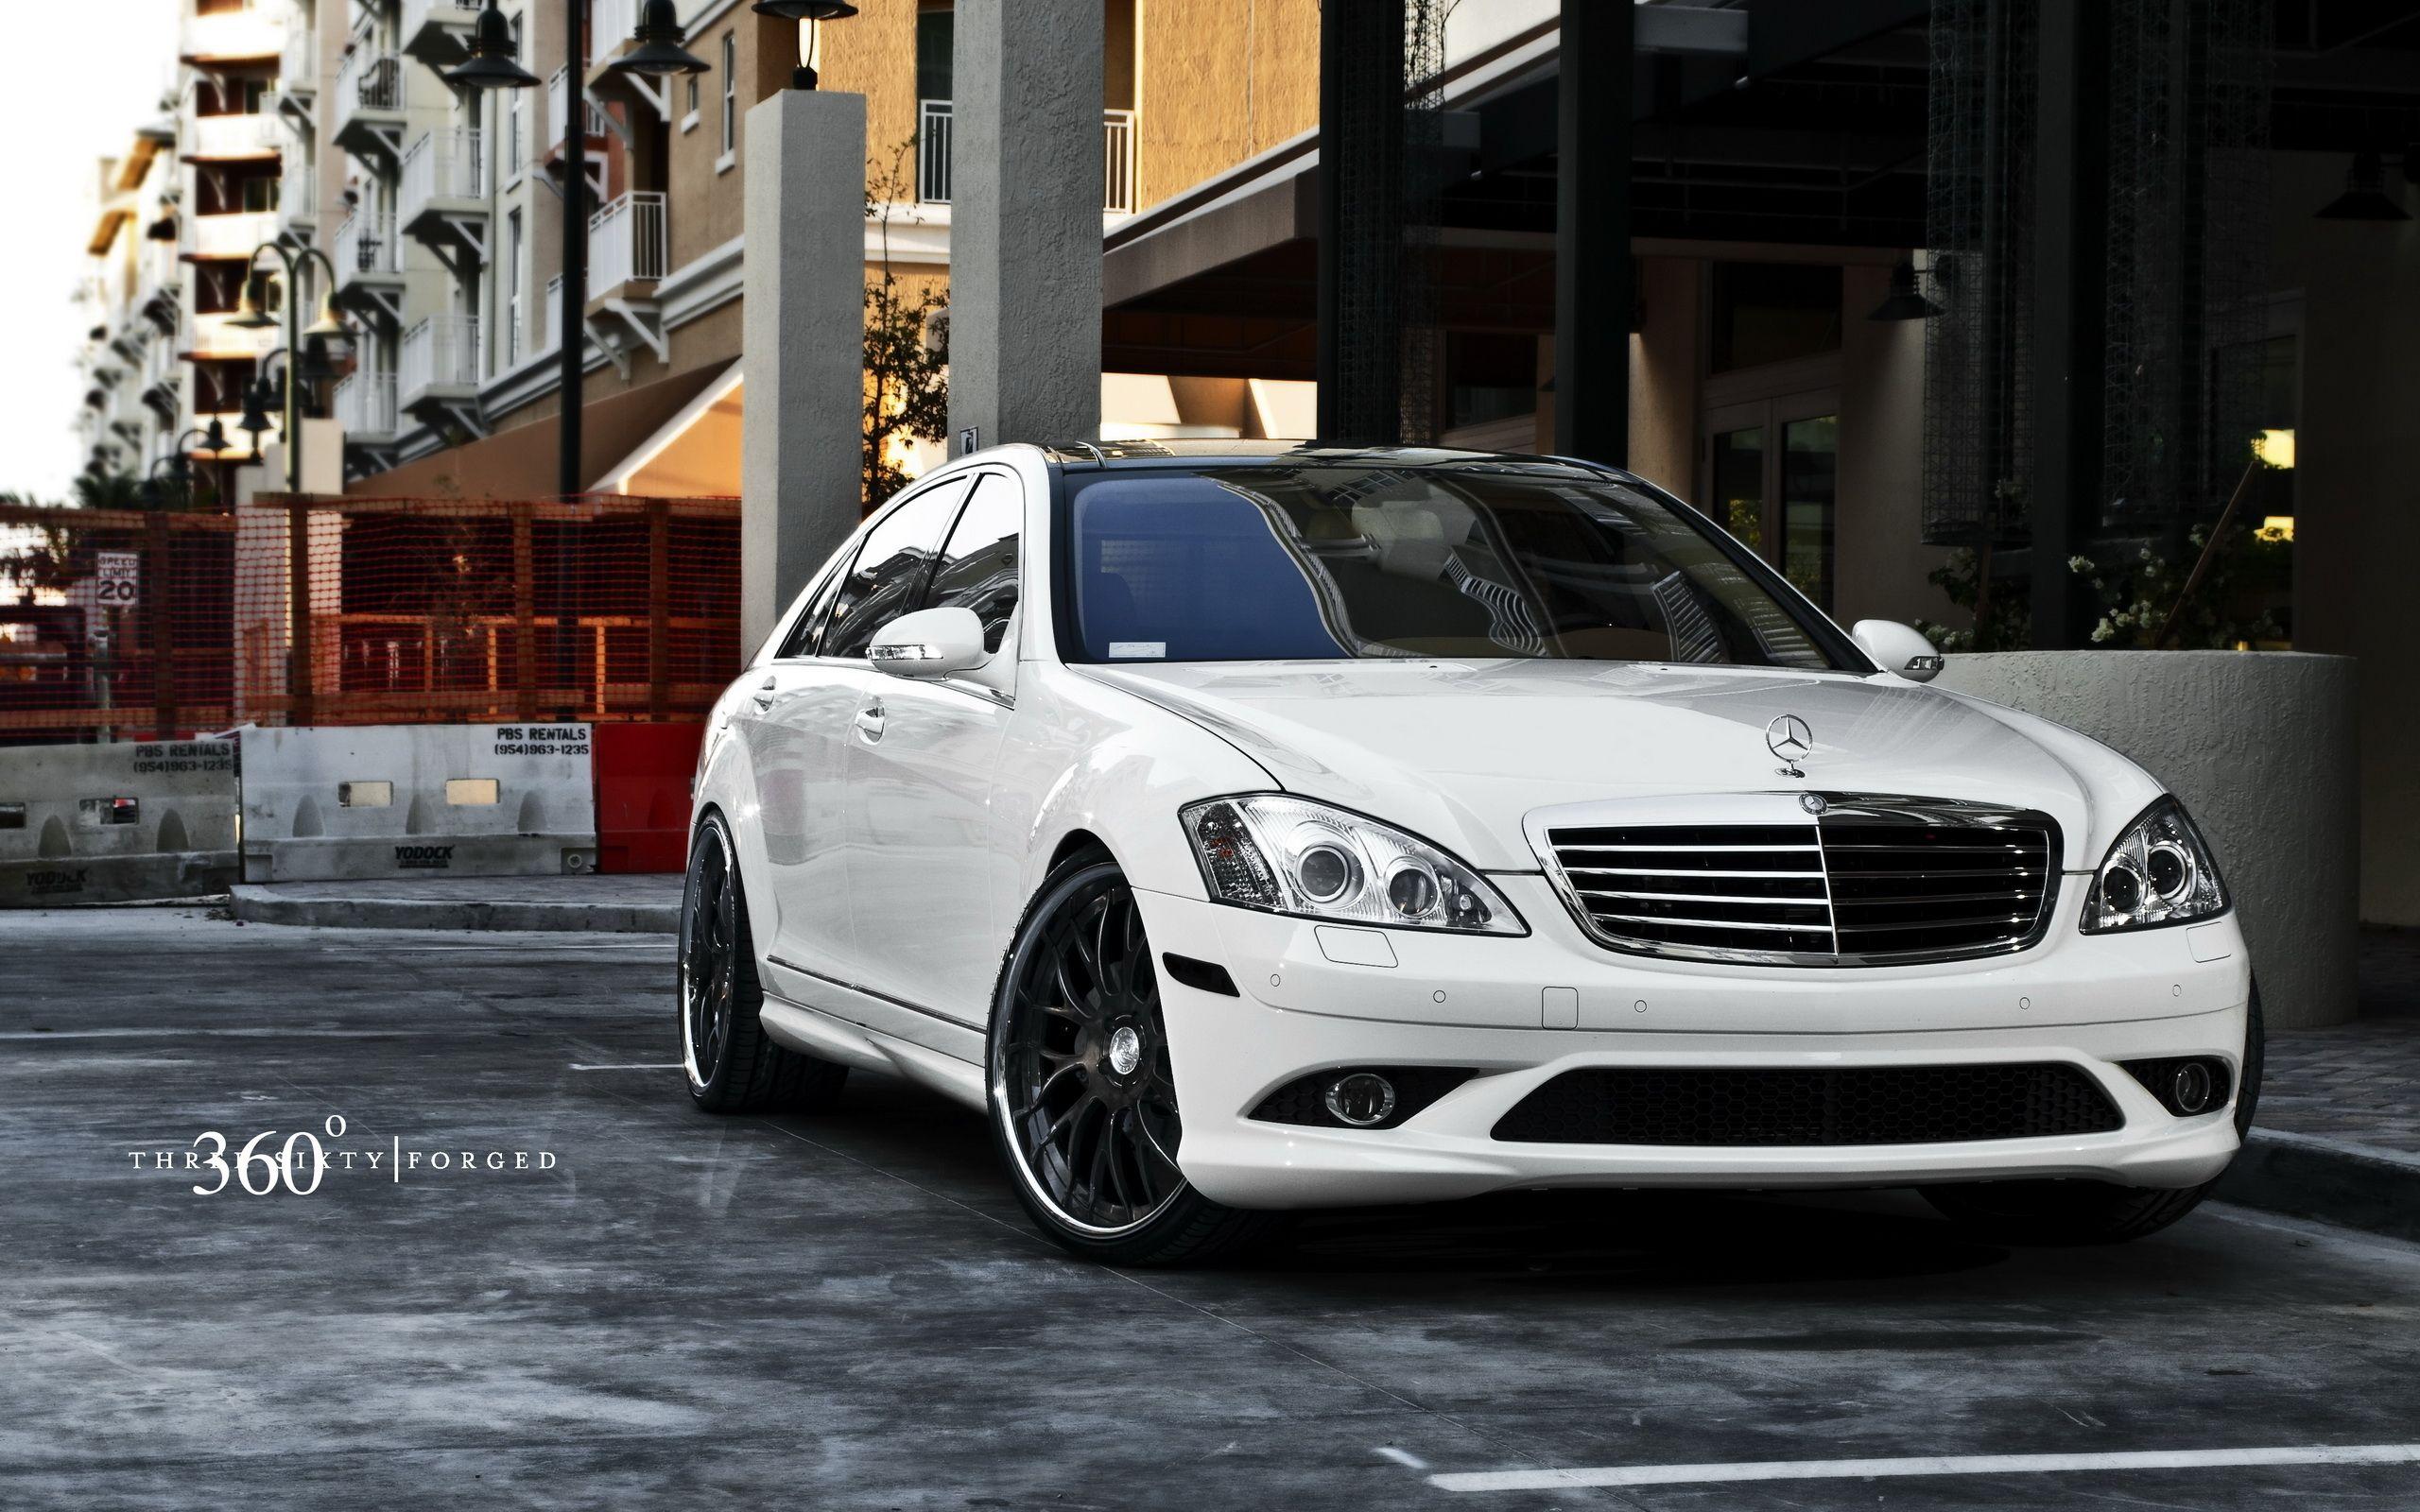 Classy Mercedes S Class Wallpaper To Give Your Screen